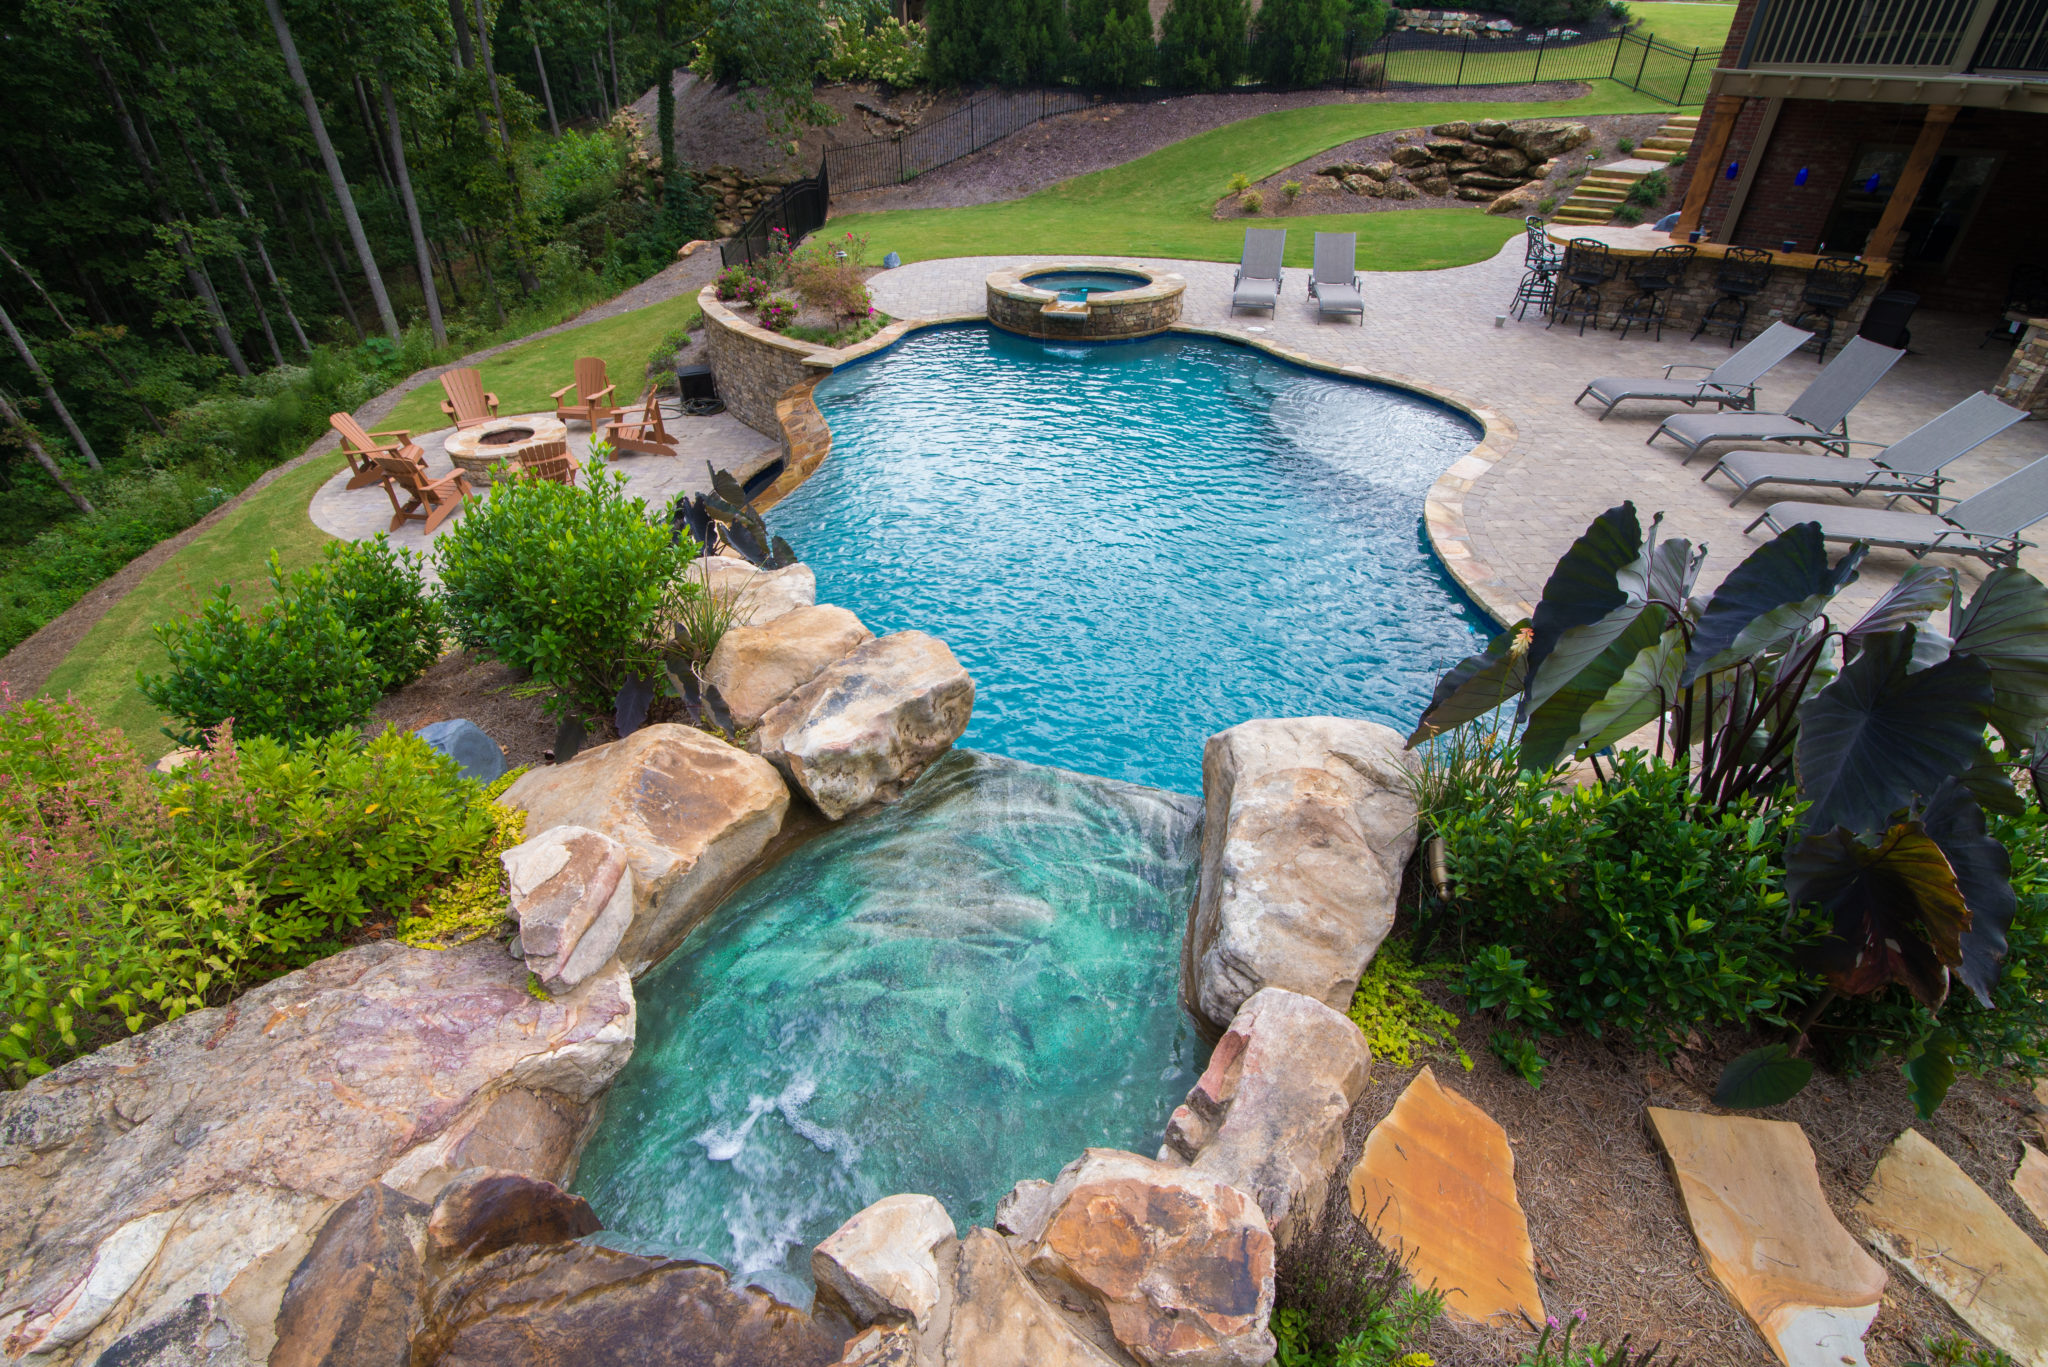 A custom freeform pool with a boulder waterfall and grotto nestled in lush landscaping.